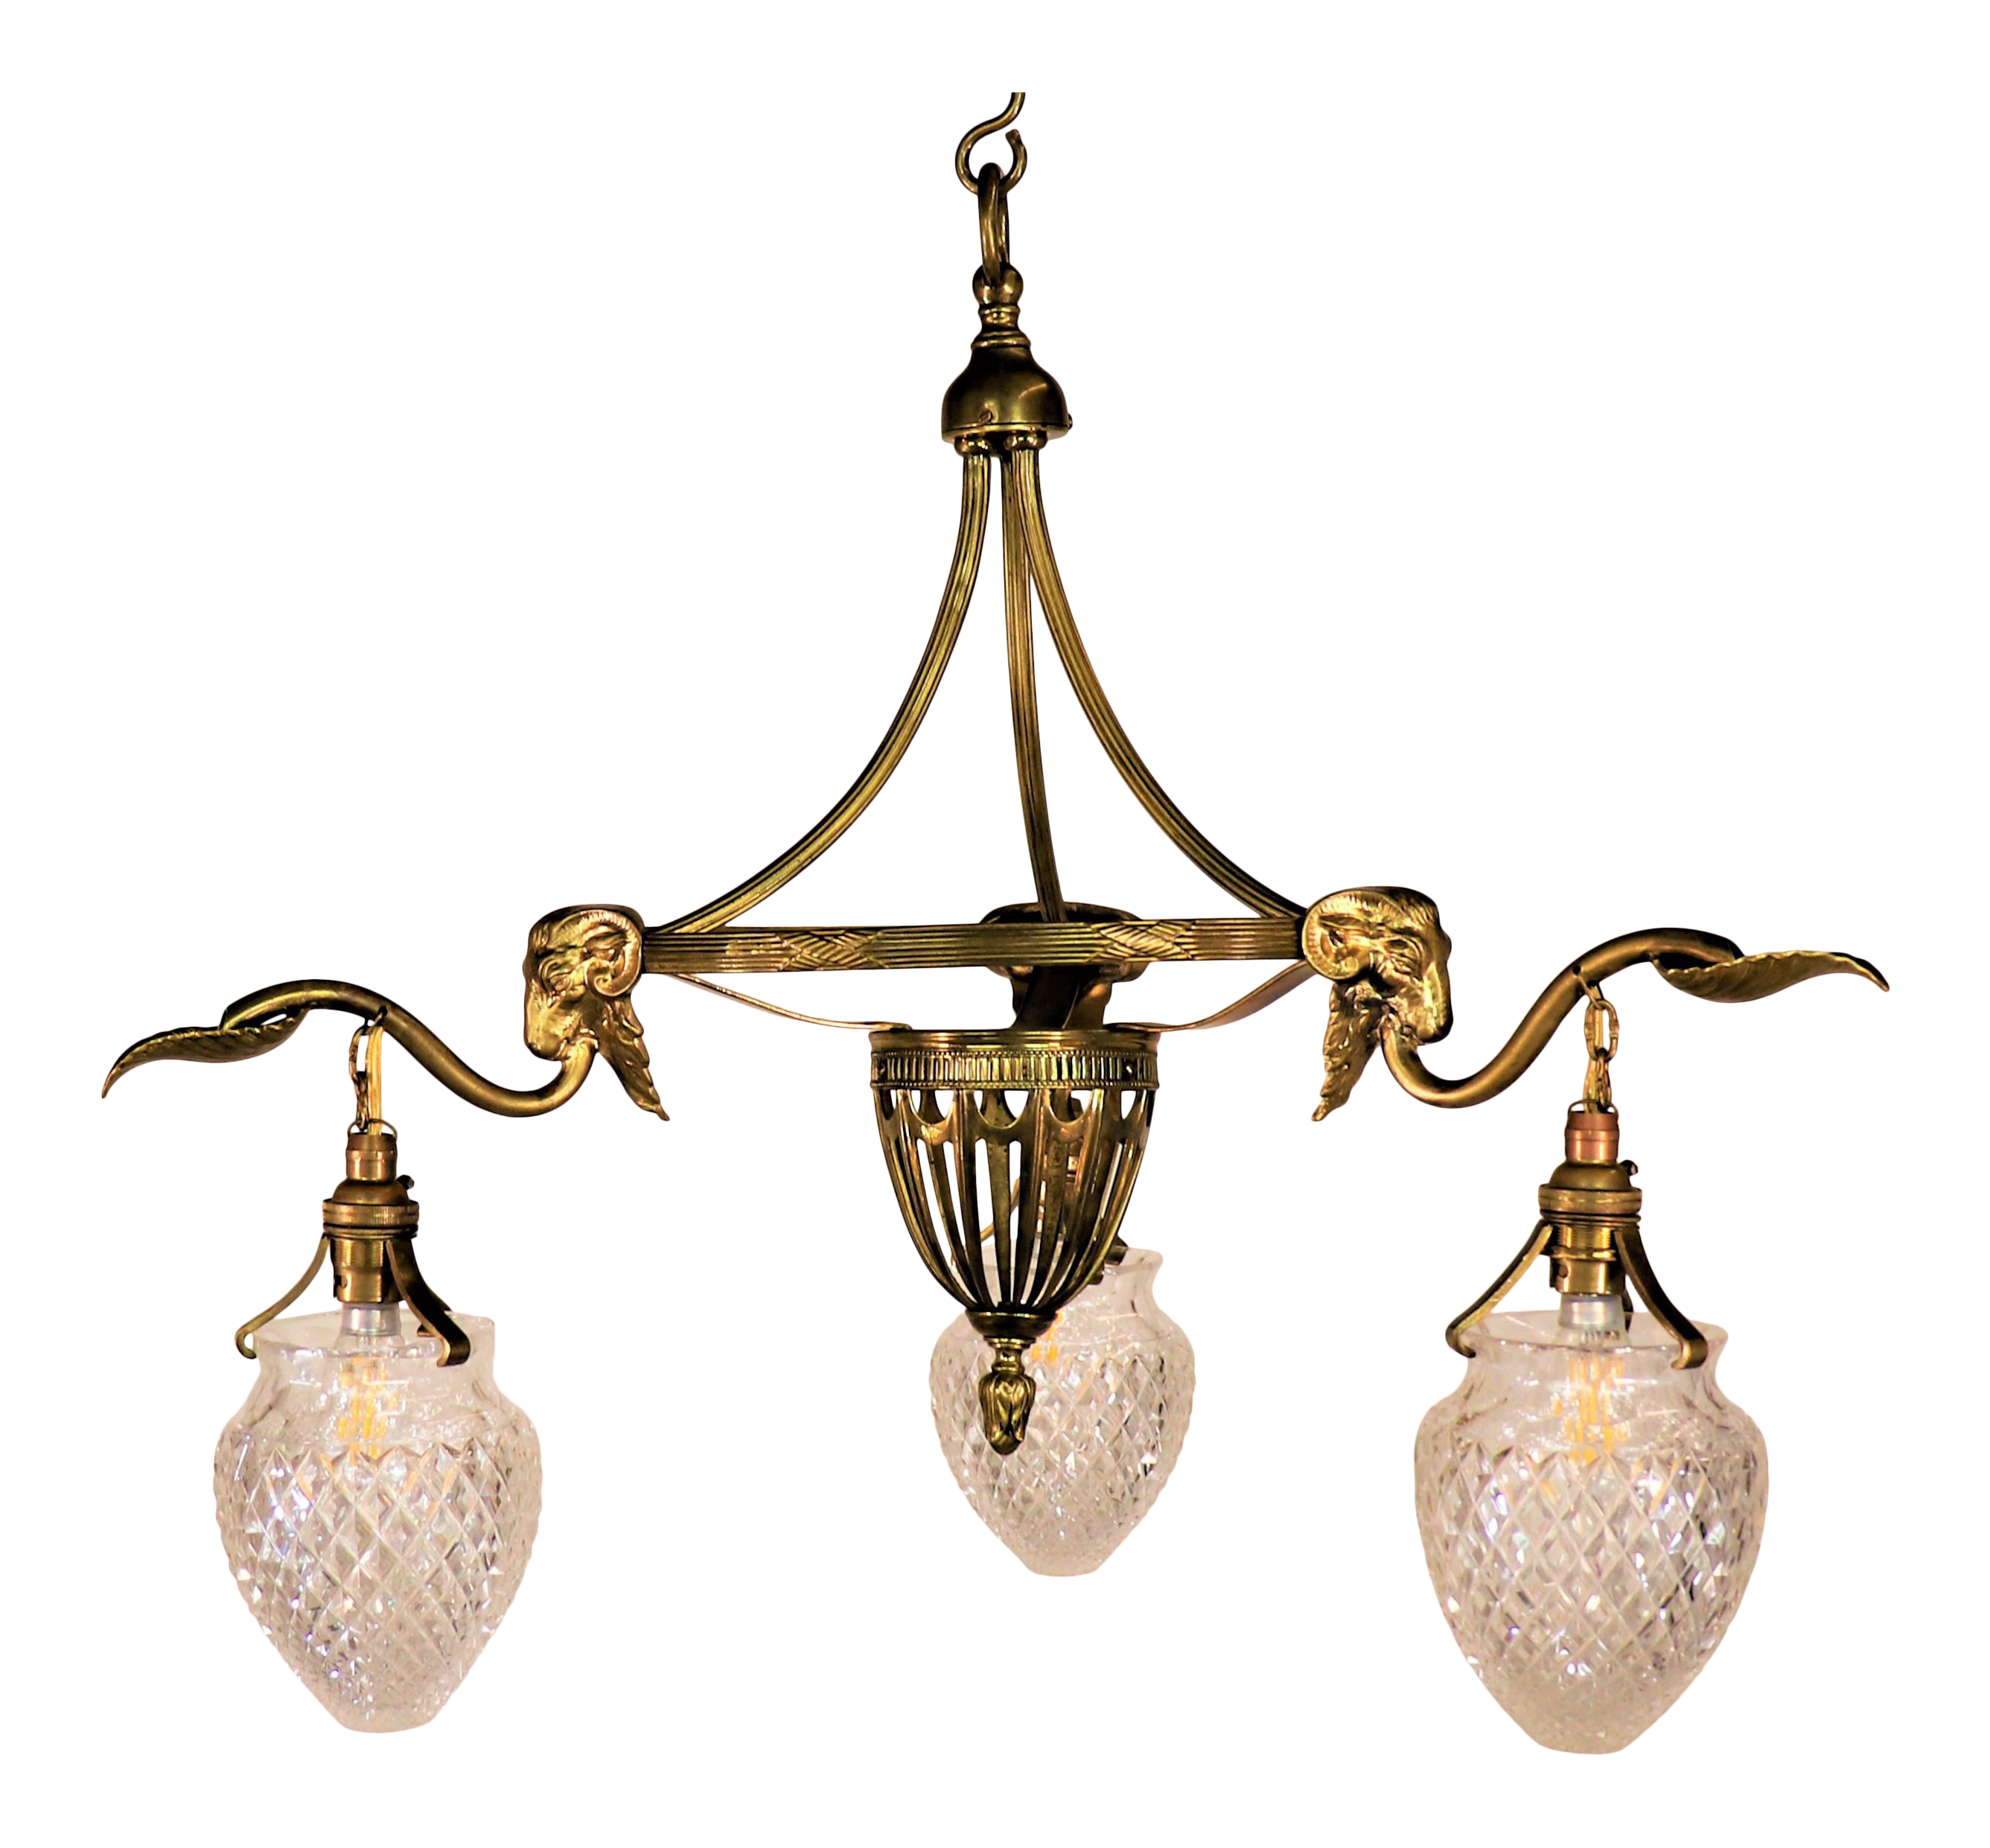 Circa 1920 French Neoclassical Ram Chandelier with Crystal Pine Cones -  Antiques Resources, Chicago